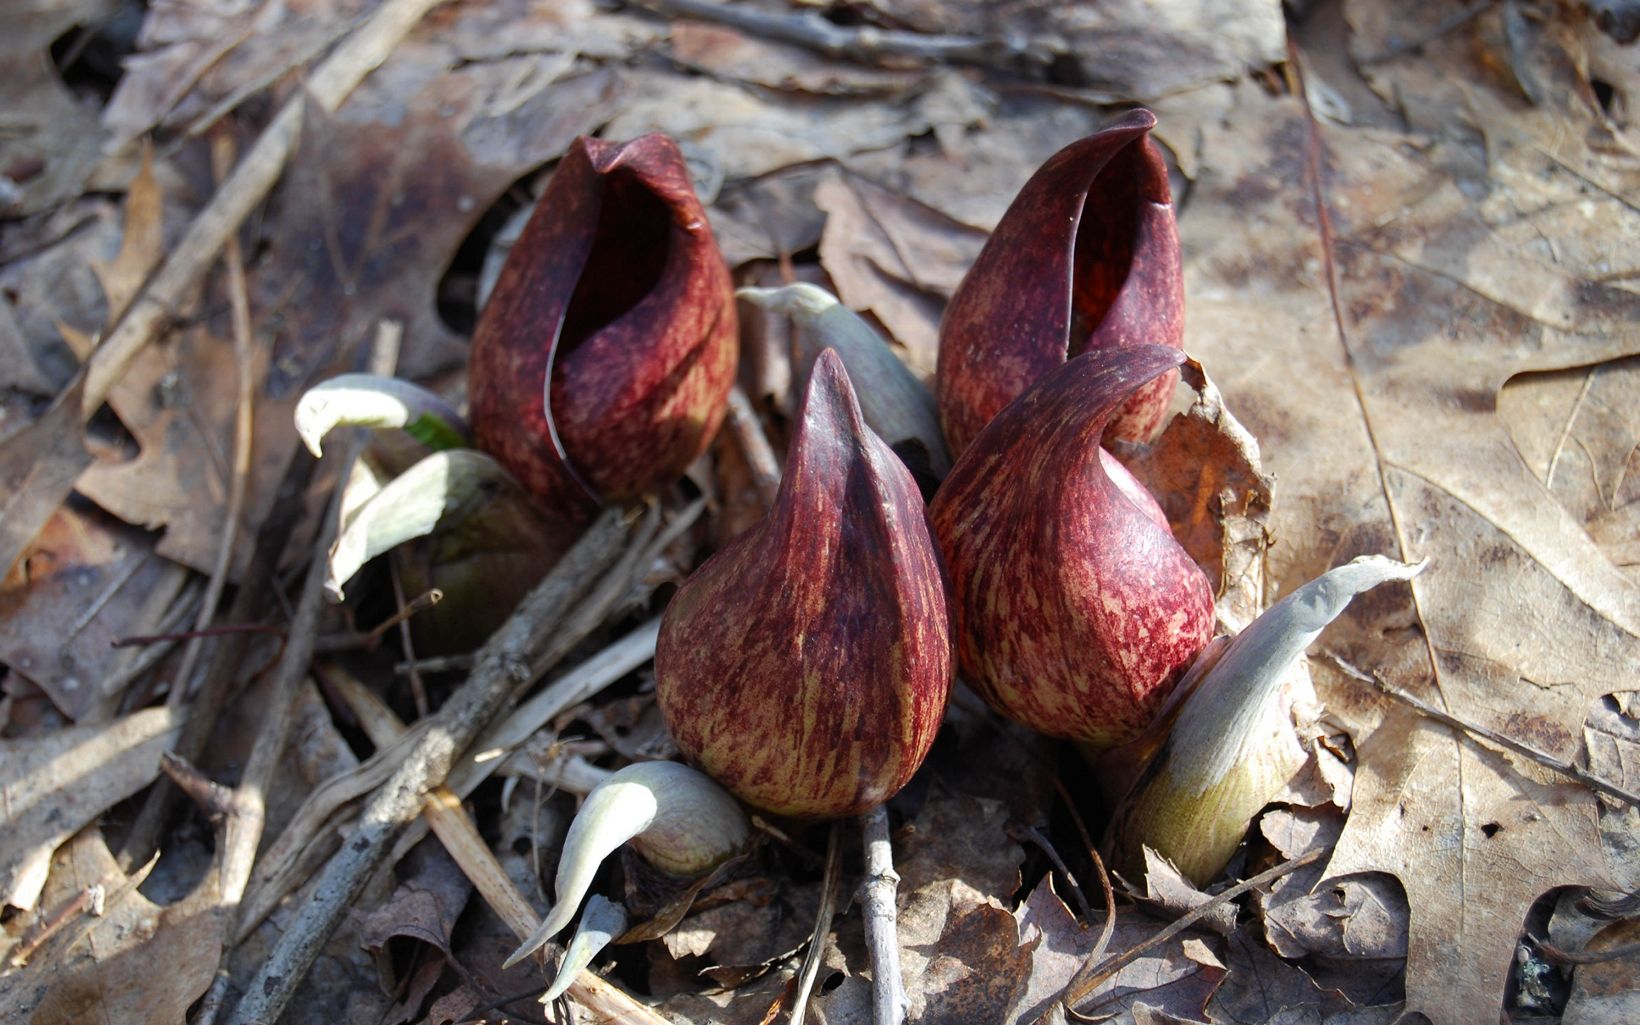 Harbinger of Spring Emerging skunk cabbage is one of the very first signs that spring is on the way and are abundant at Big Darby Creek Headwaters Nature Preserve. © CammyBean, CC BY-NC 2.0